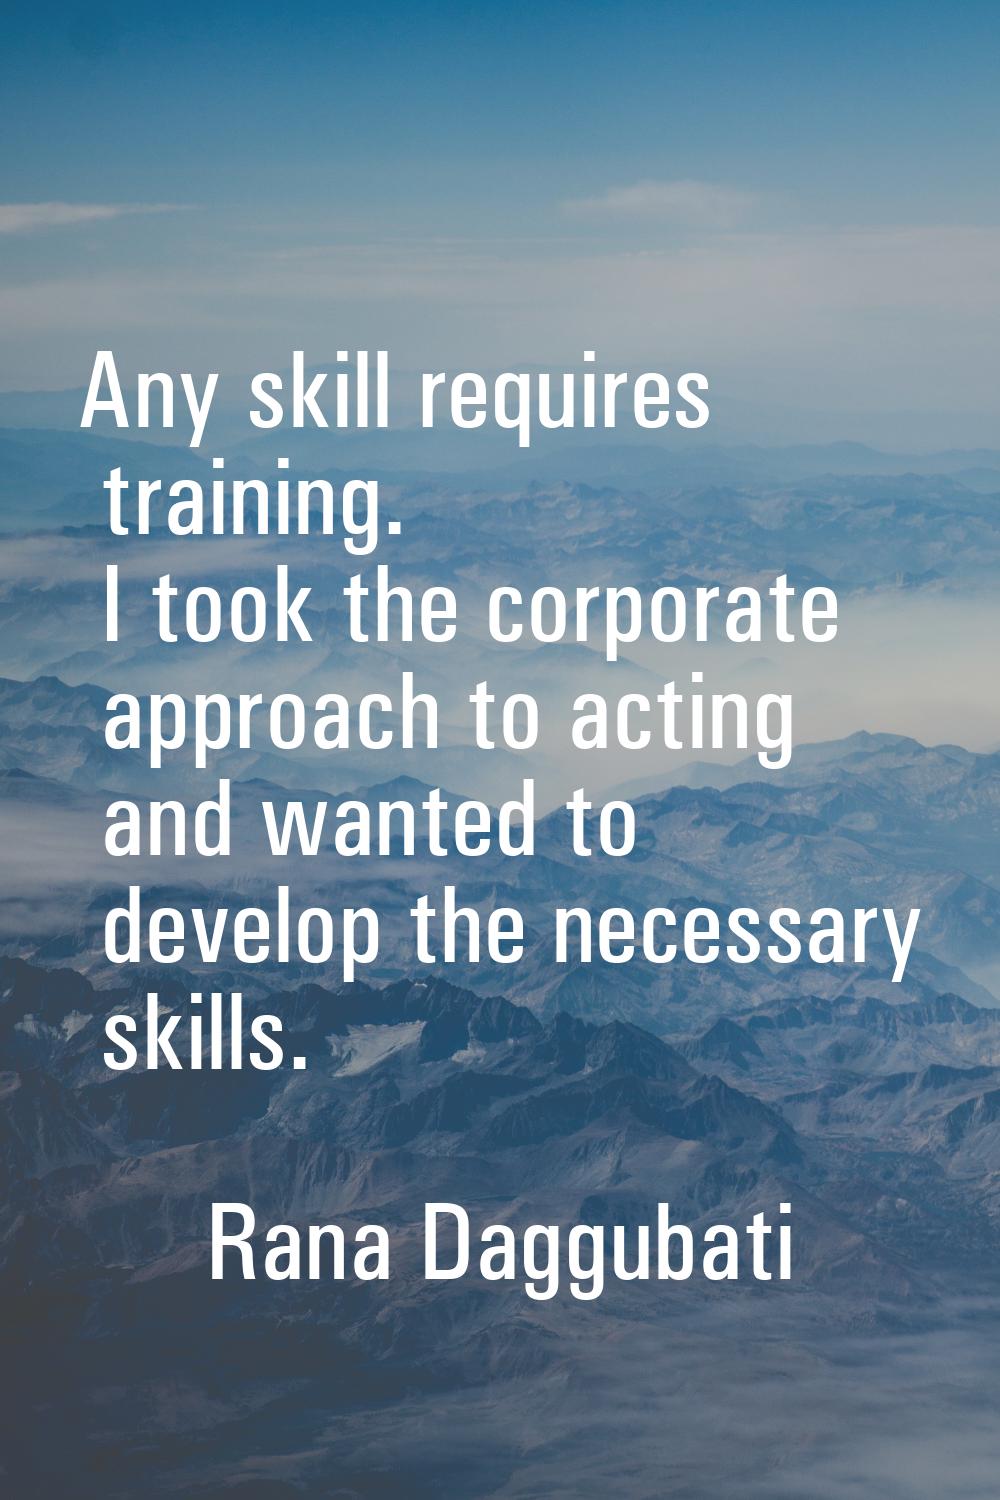 Any skill requires training. I took the corporate approach to acting and wanted to develop the nece